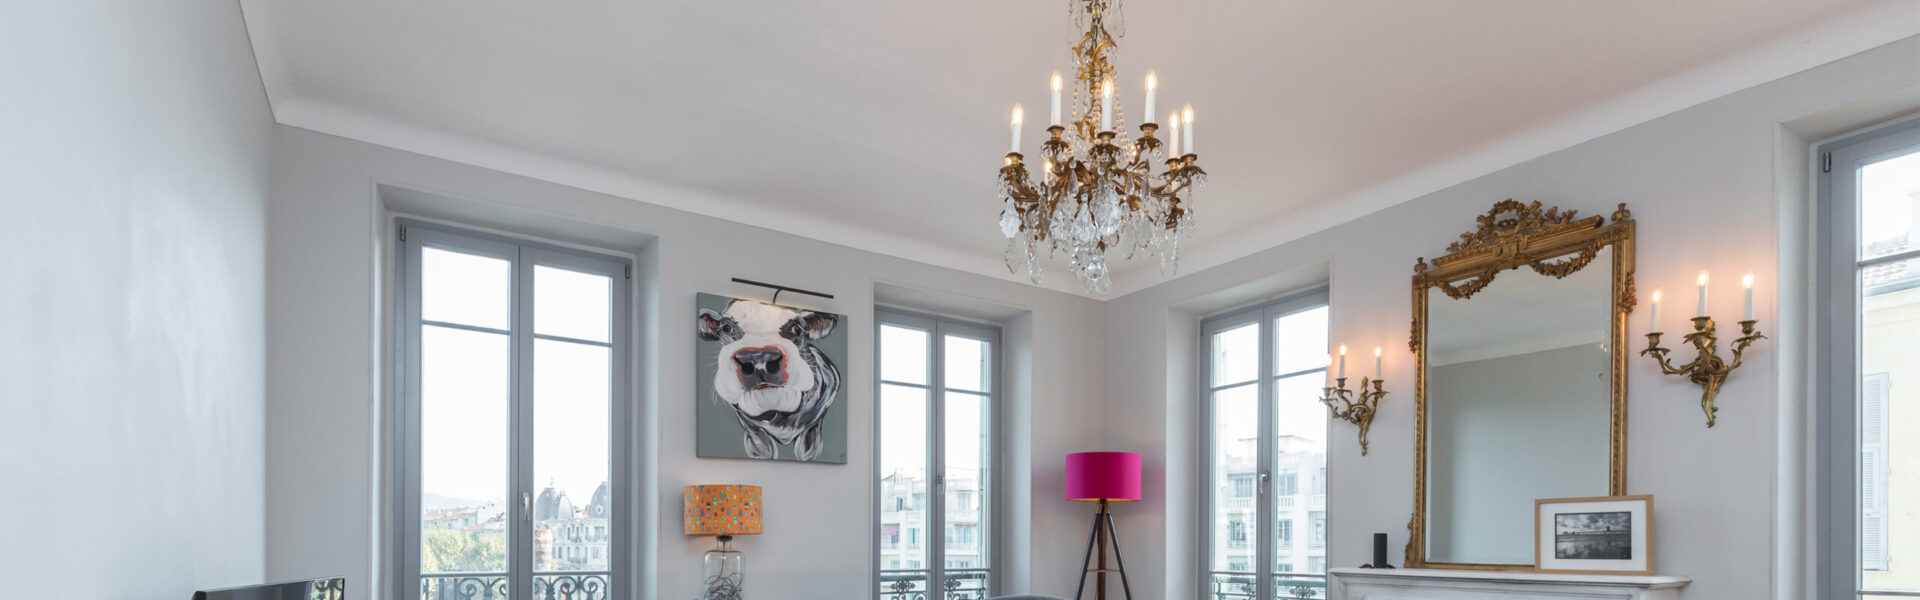 Period-lighting-featuring a rococco chandelier in-an-apartment-in-Nice-France-by-Fritz-Fryer-Lighting